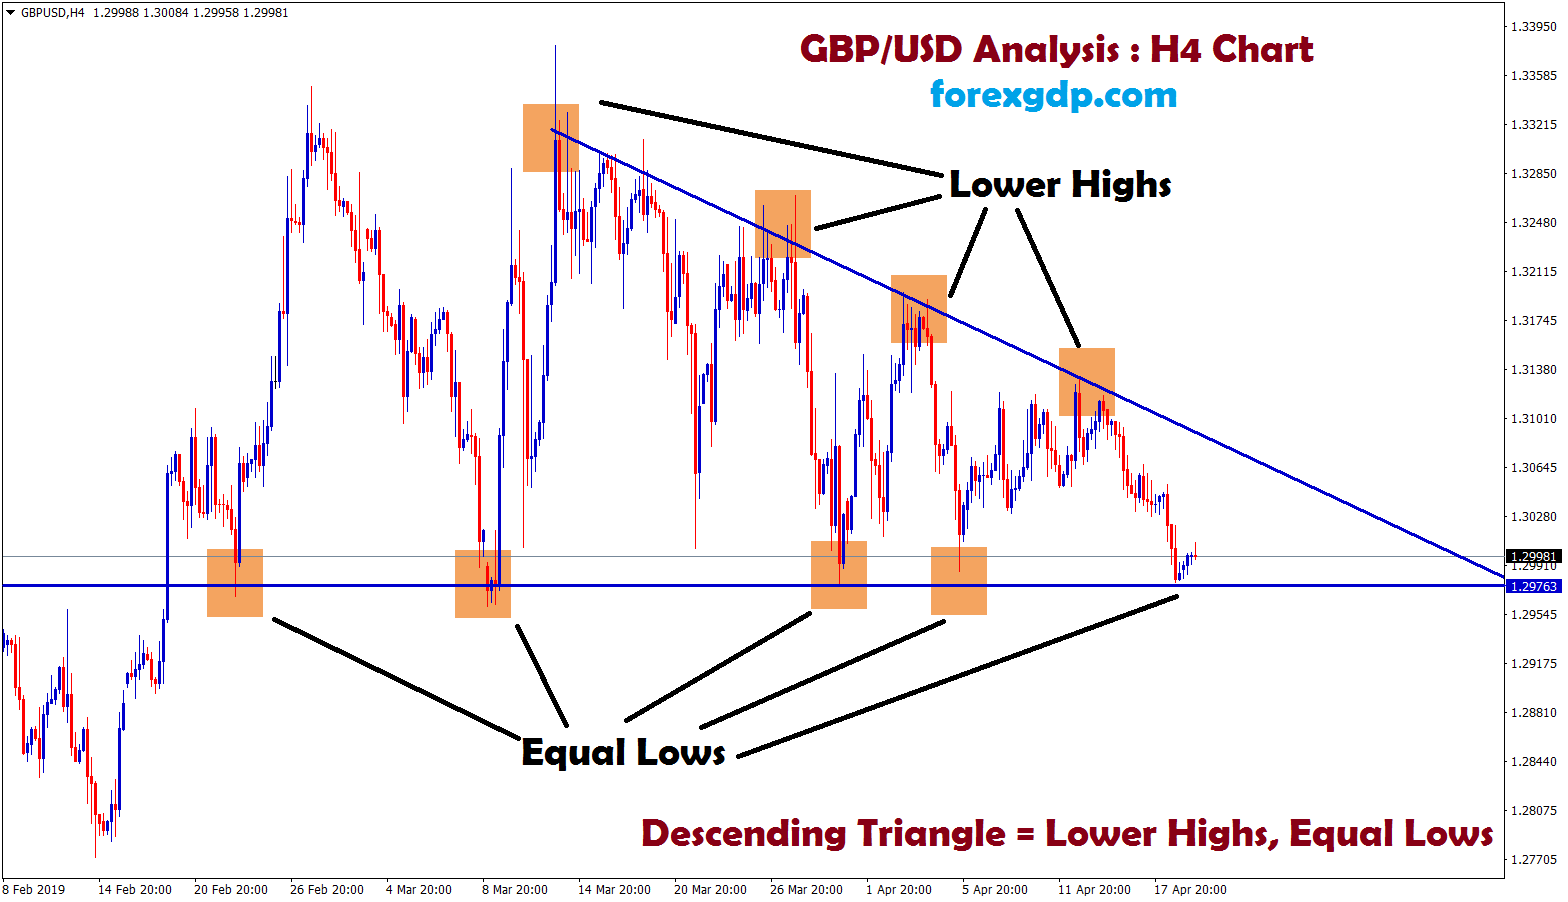 gbp/usd formed equal lows, lower highs in H4 chart